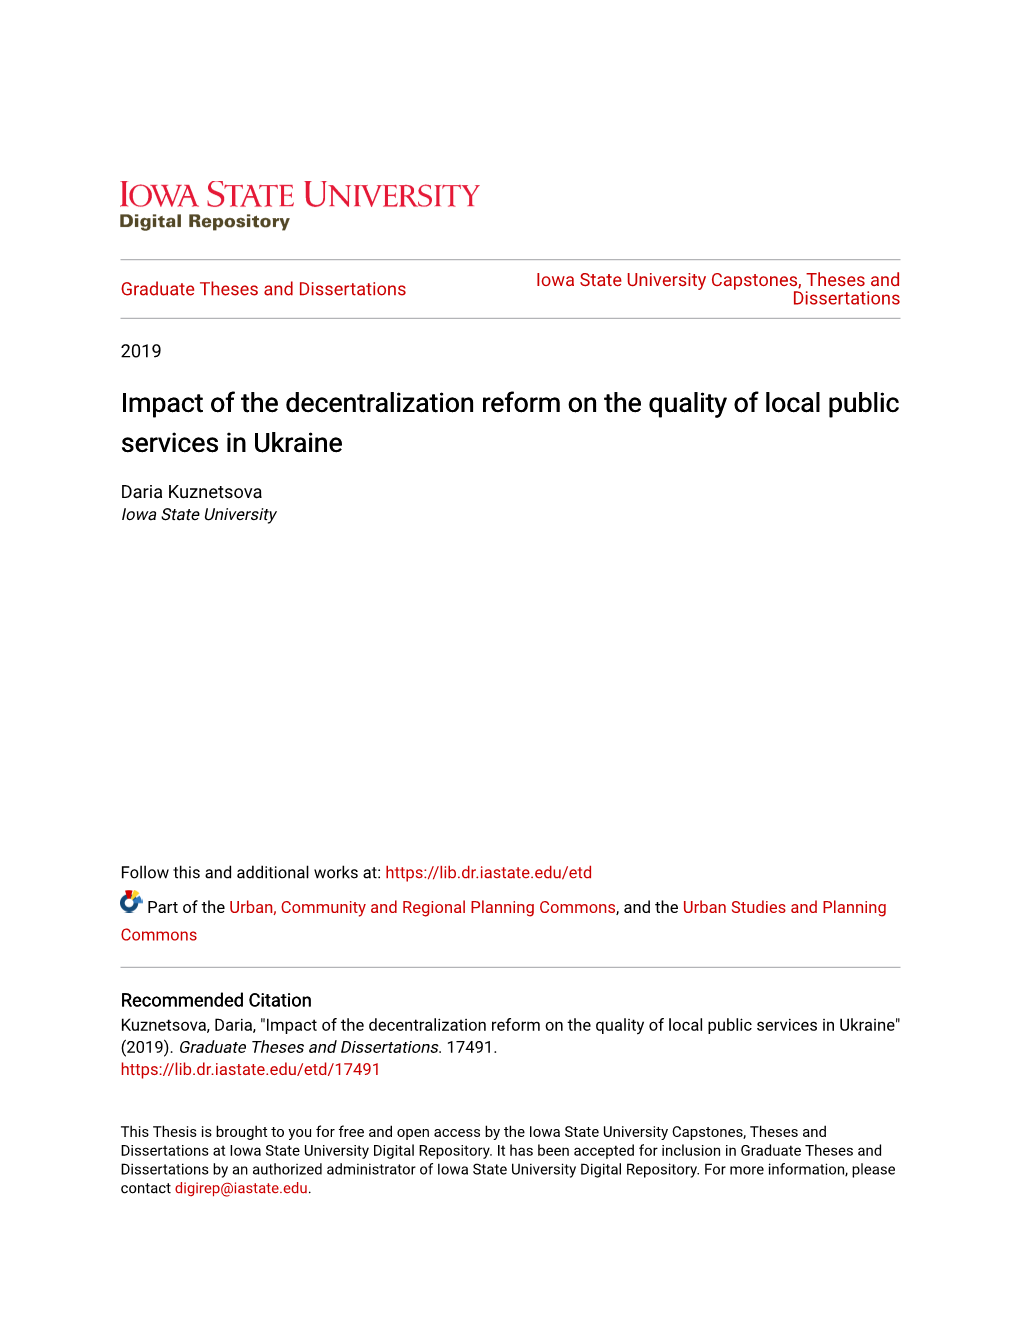 Impact of the Decentralization Reform on the Quality of Local Public Services in Ukraine